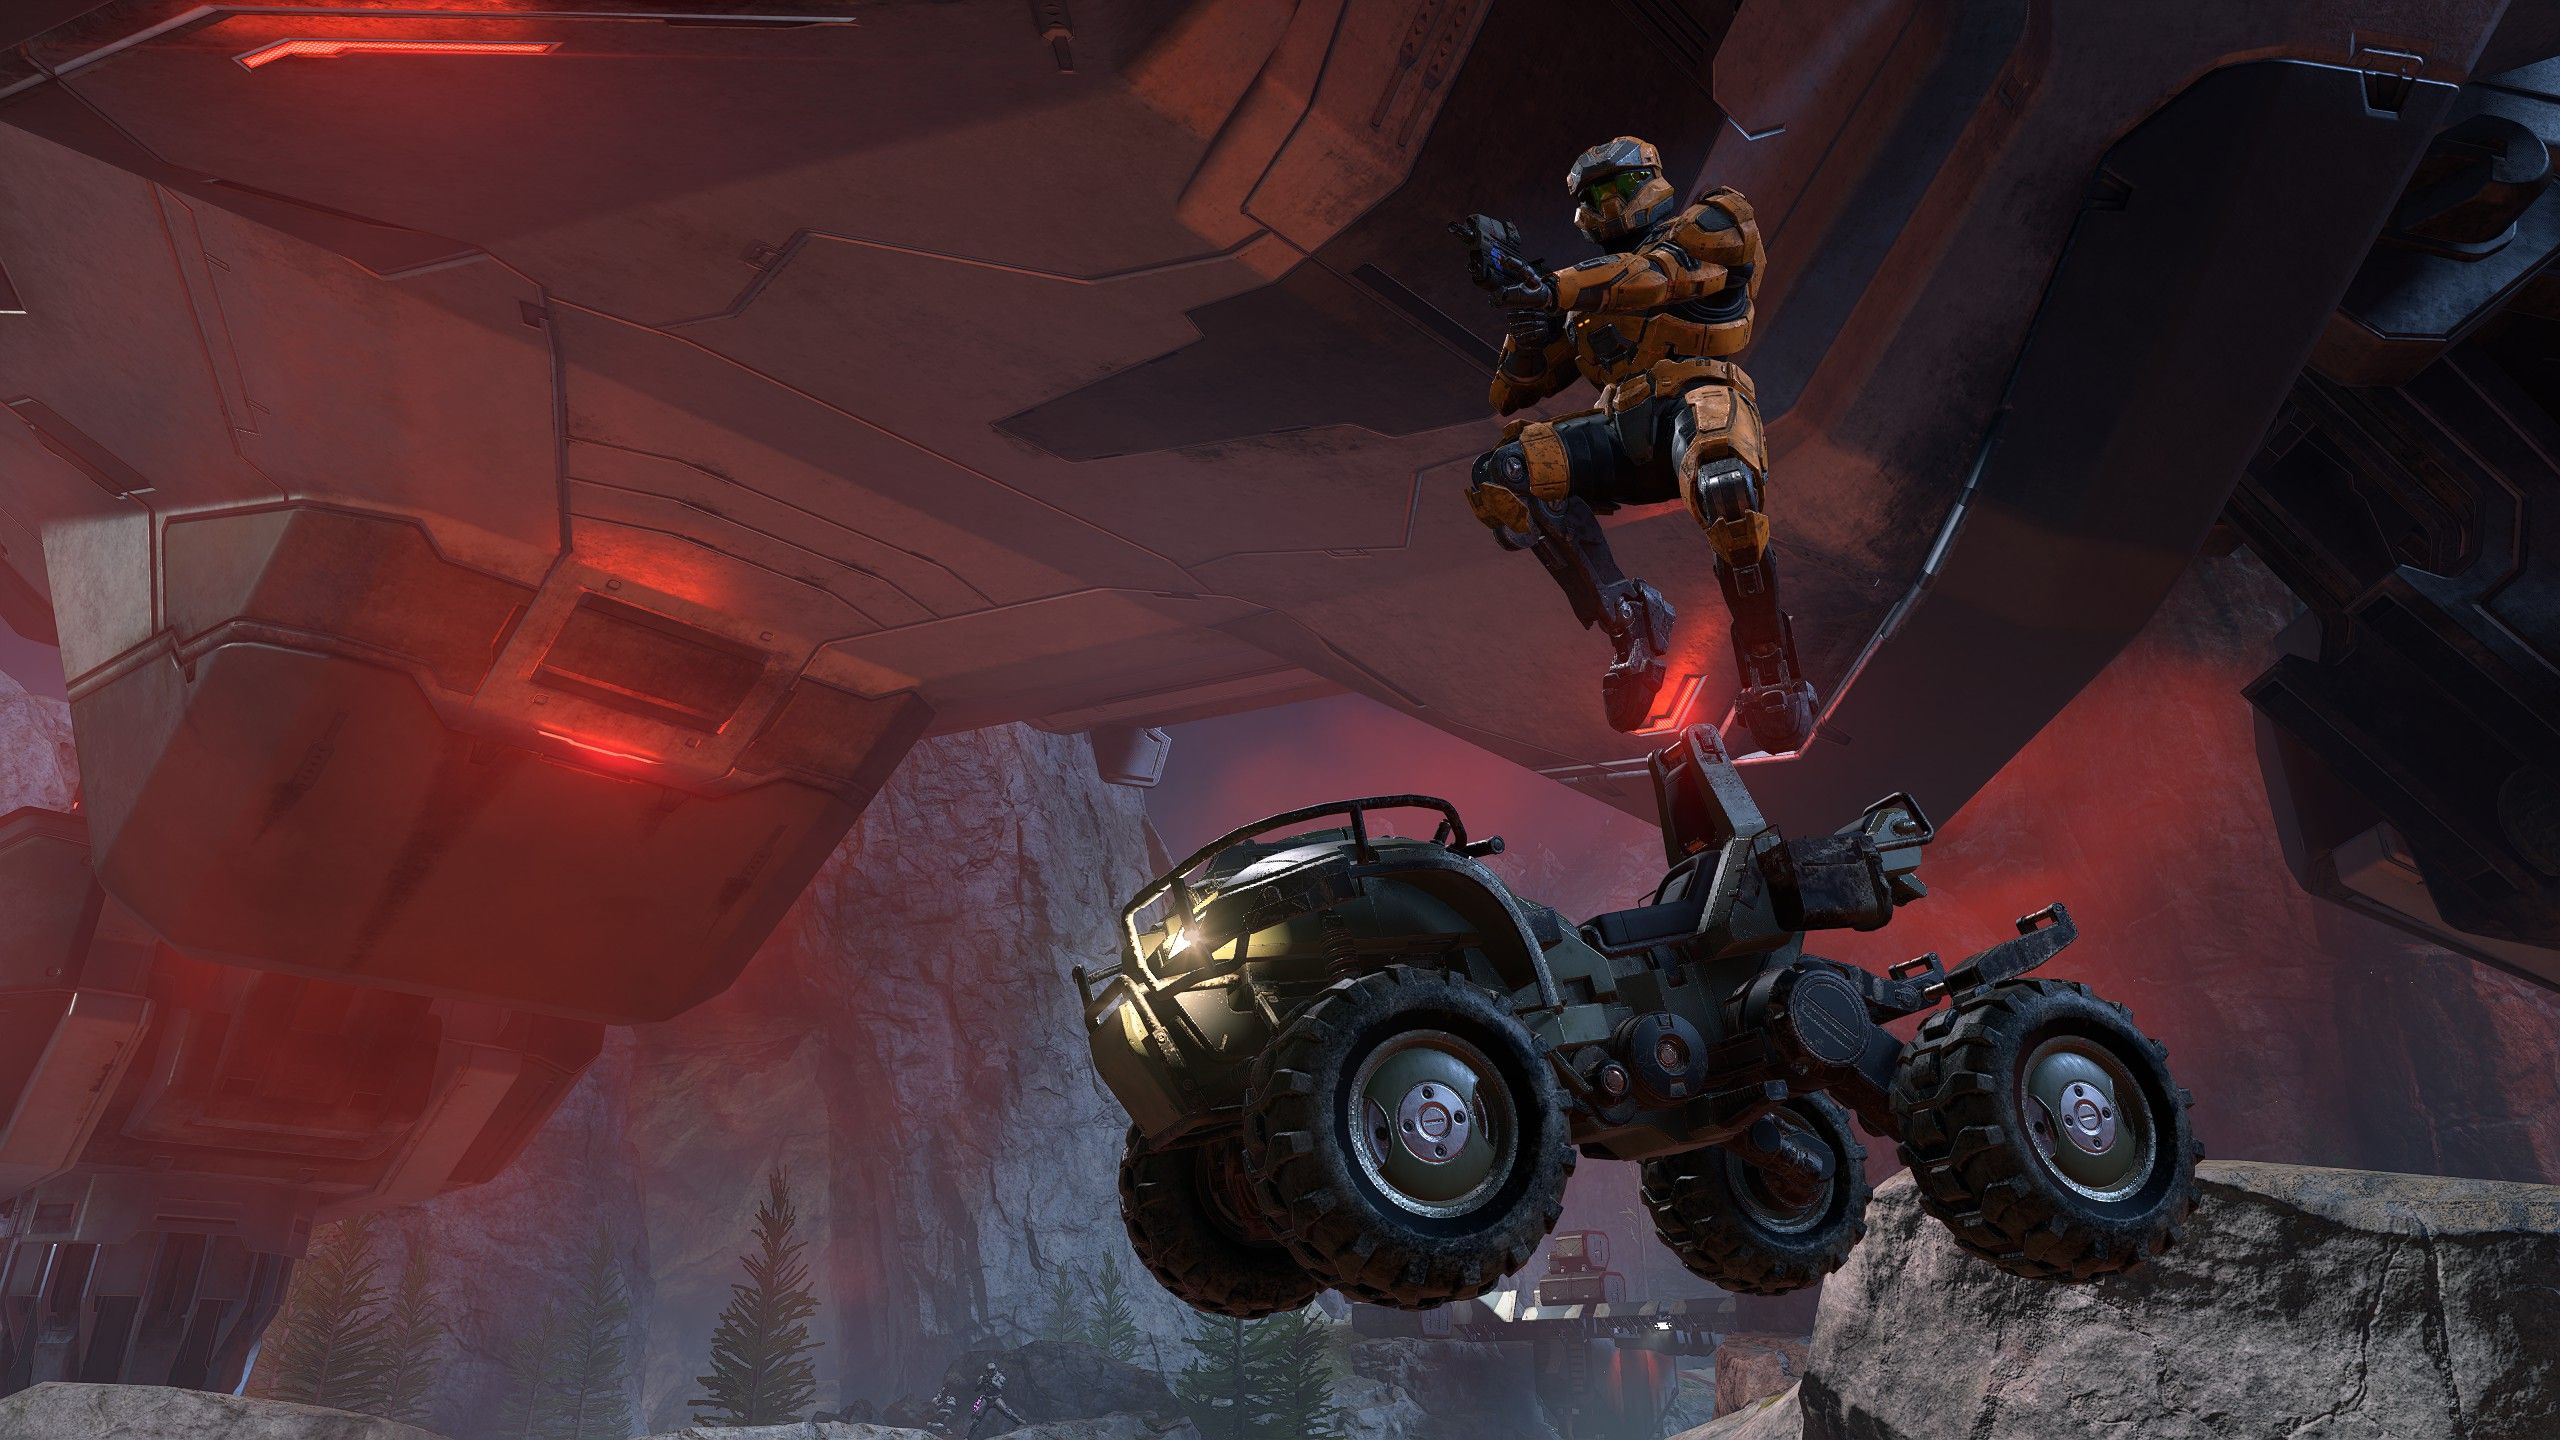 A spartan in Halo Infinite leaps from a warthog vehicle, gun ready